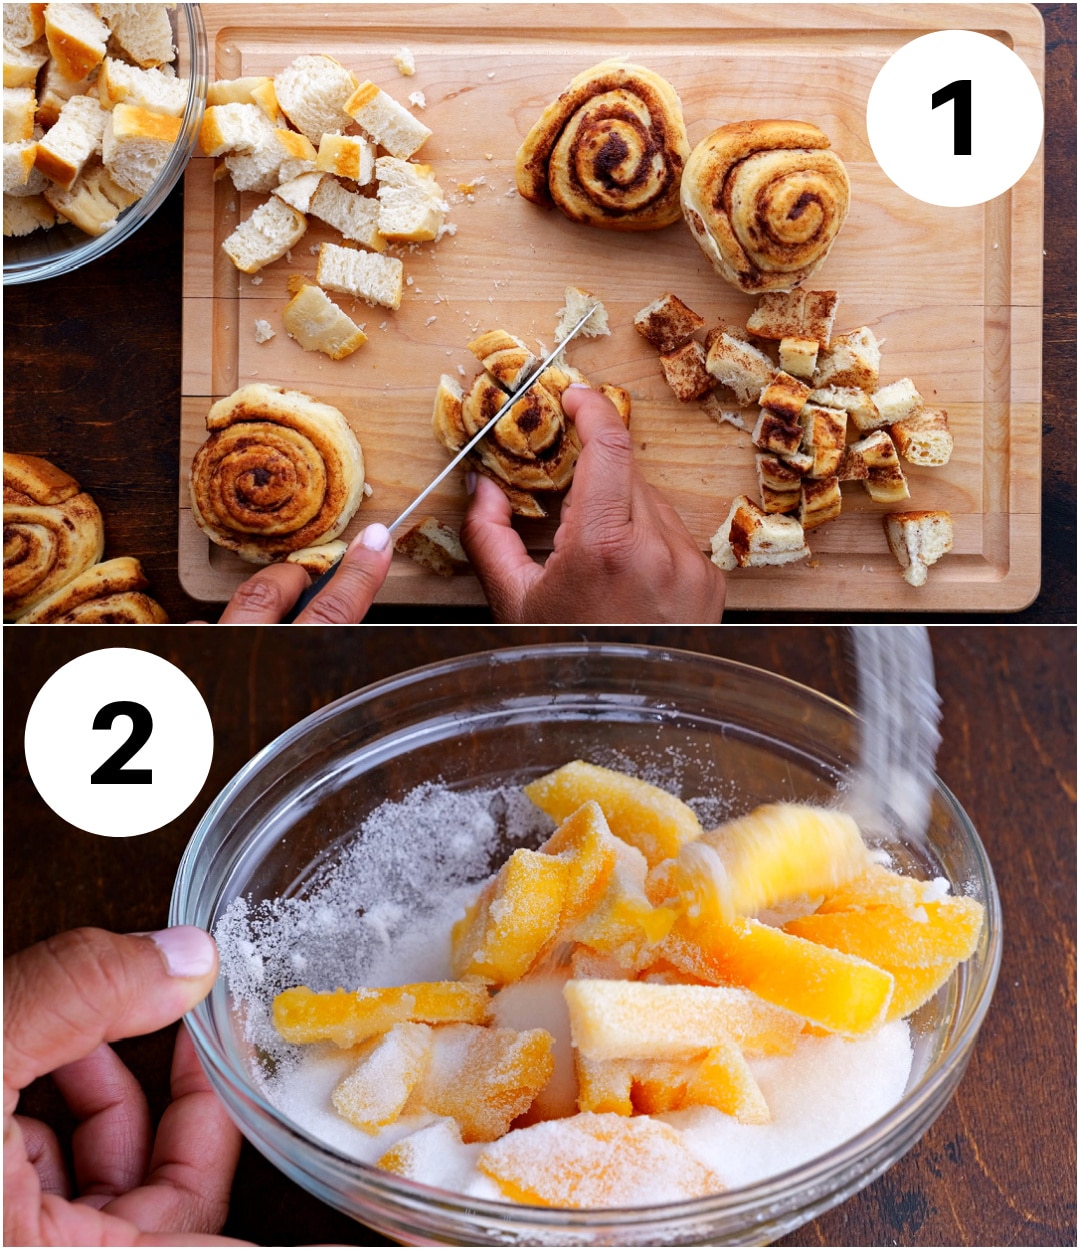 Collage showing cutting cinnamon rolls in pieces and stirring peaches with sugar.